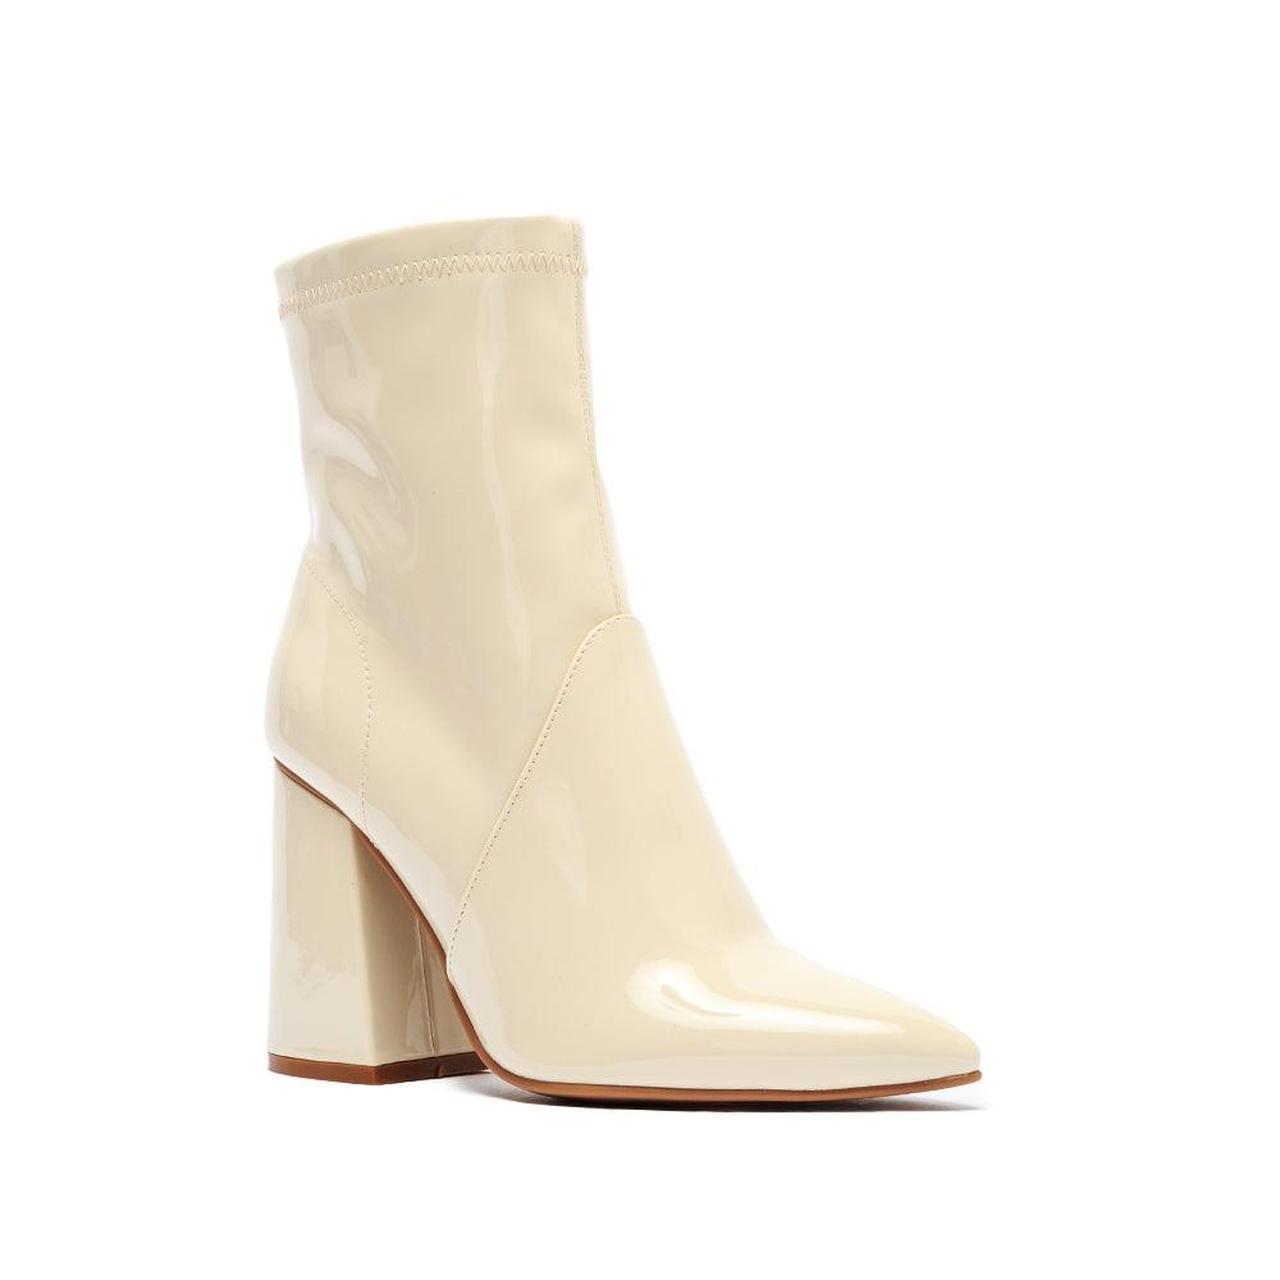 Cream white vegan patent leather ankle boots, with a... - Depop